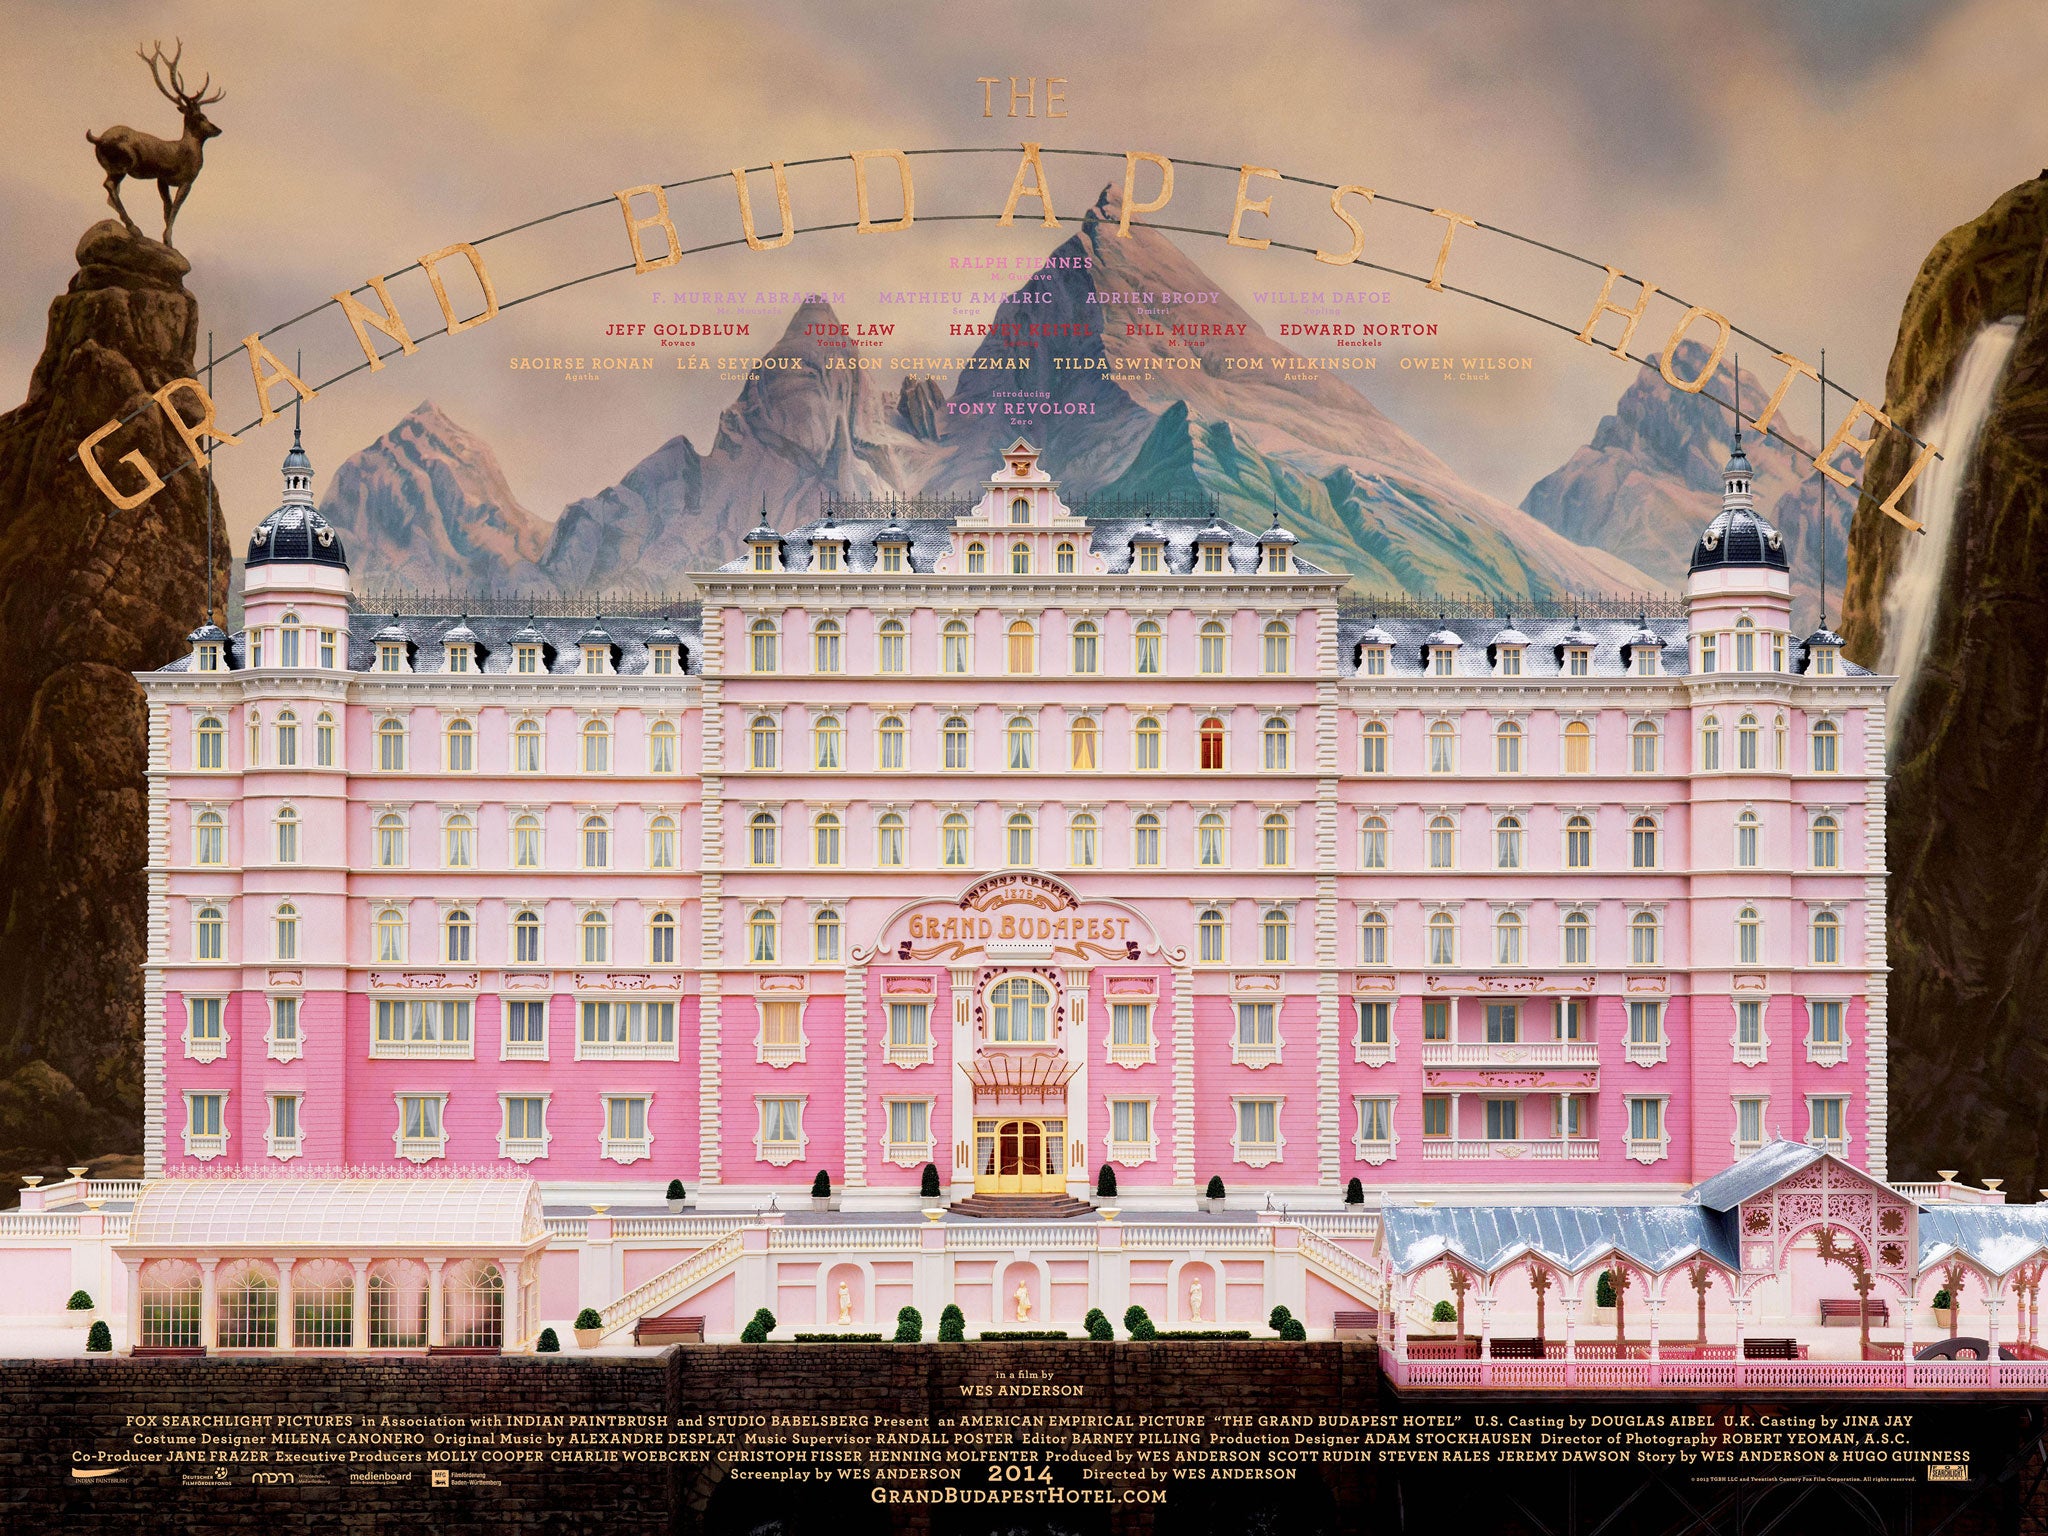 The film poster for the ‘Grand Budapest Hotel’